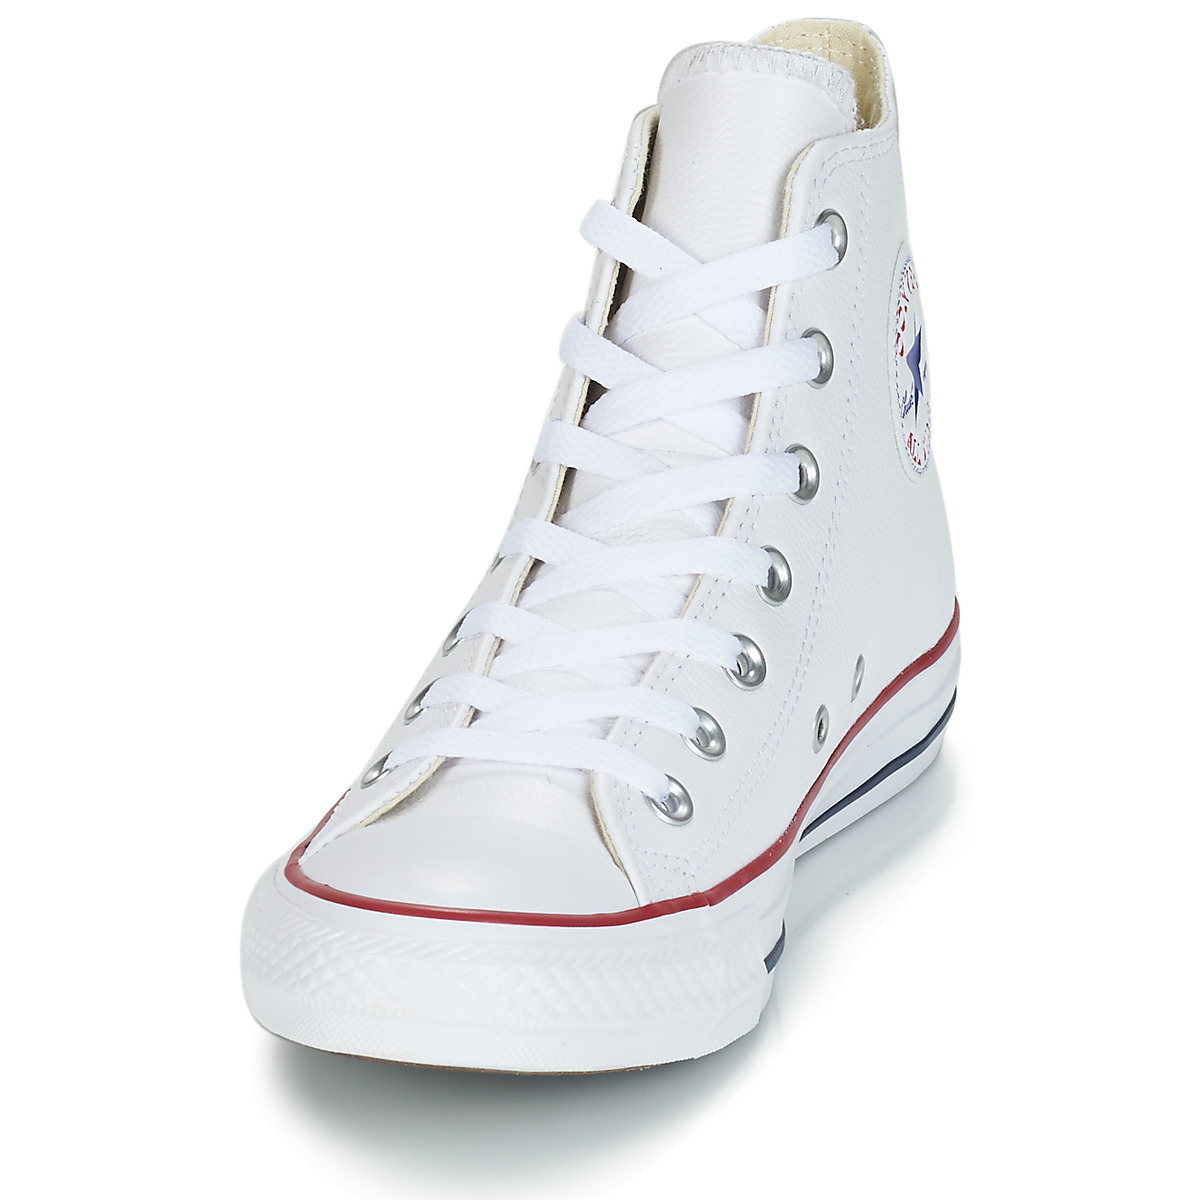 Converse Blanc CHUCK TAYLOR ALL STAR LEATHER HI ypcgd3PY